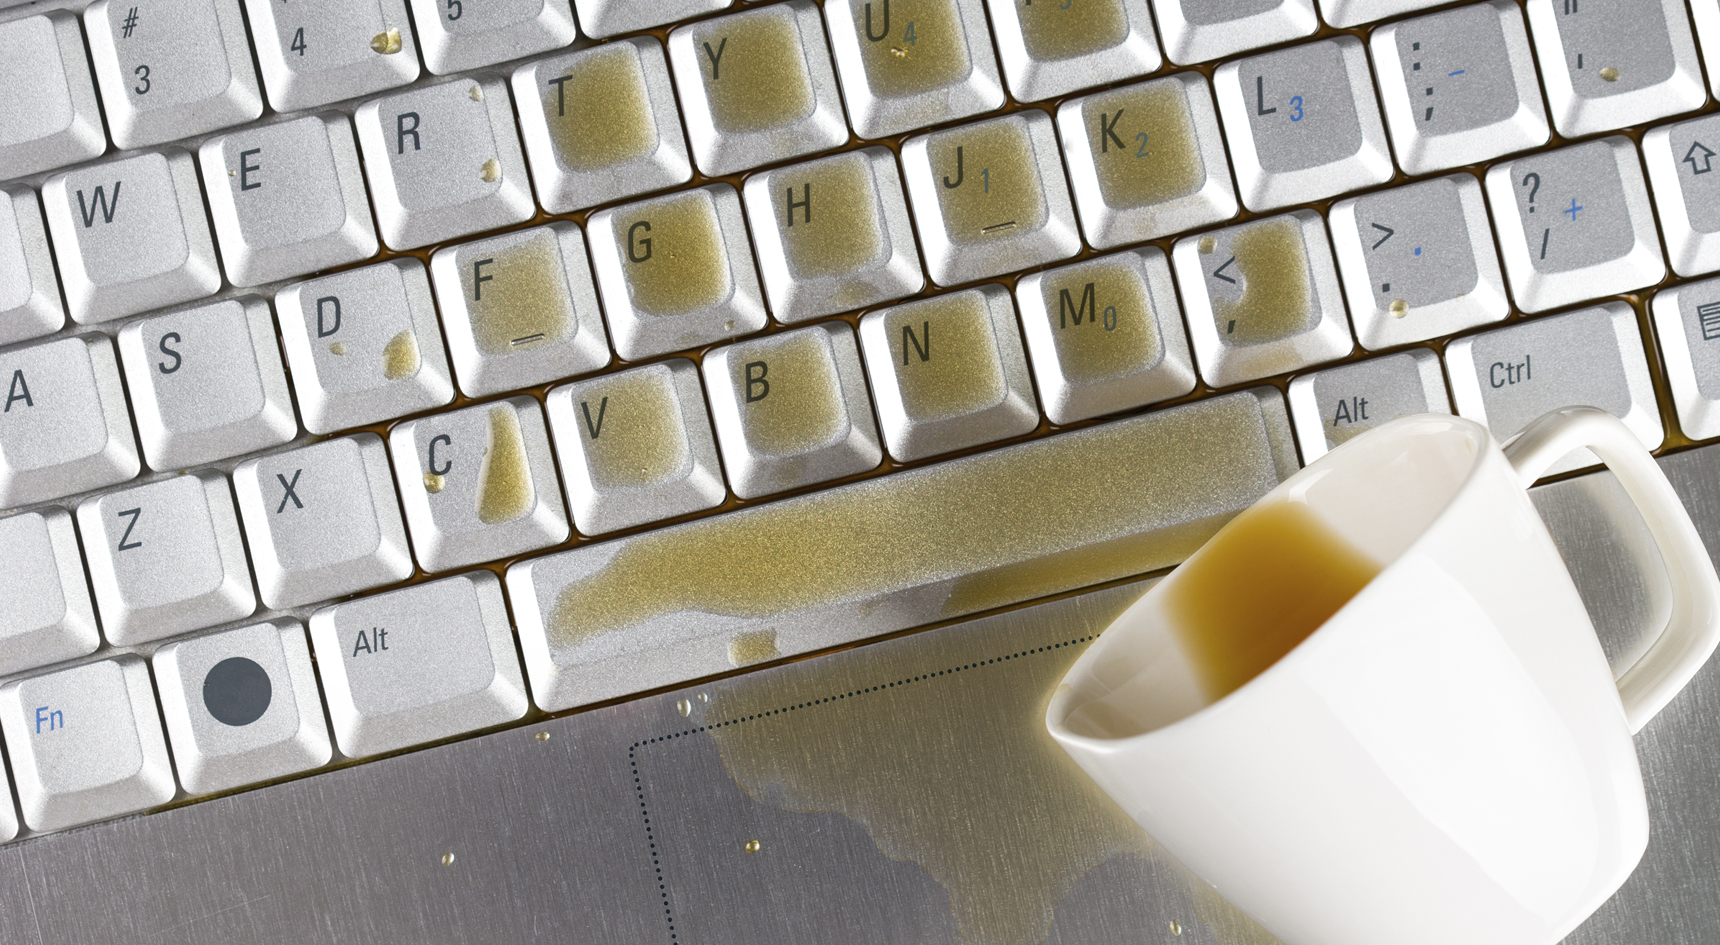 A coffee cup spilled on a laptop.